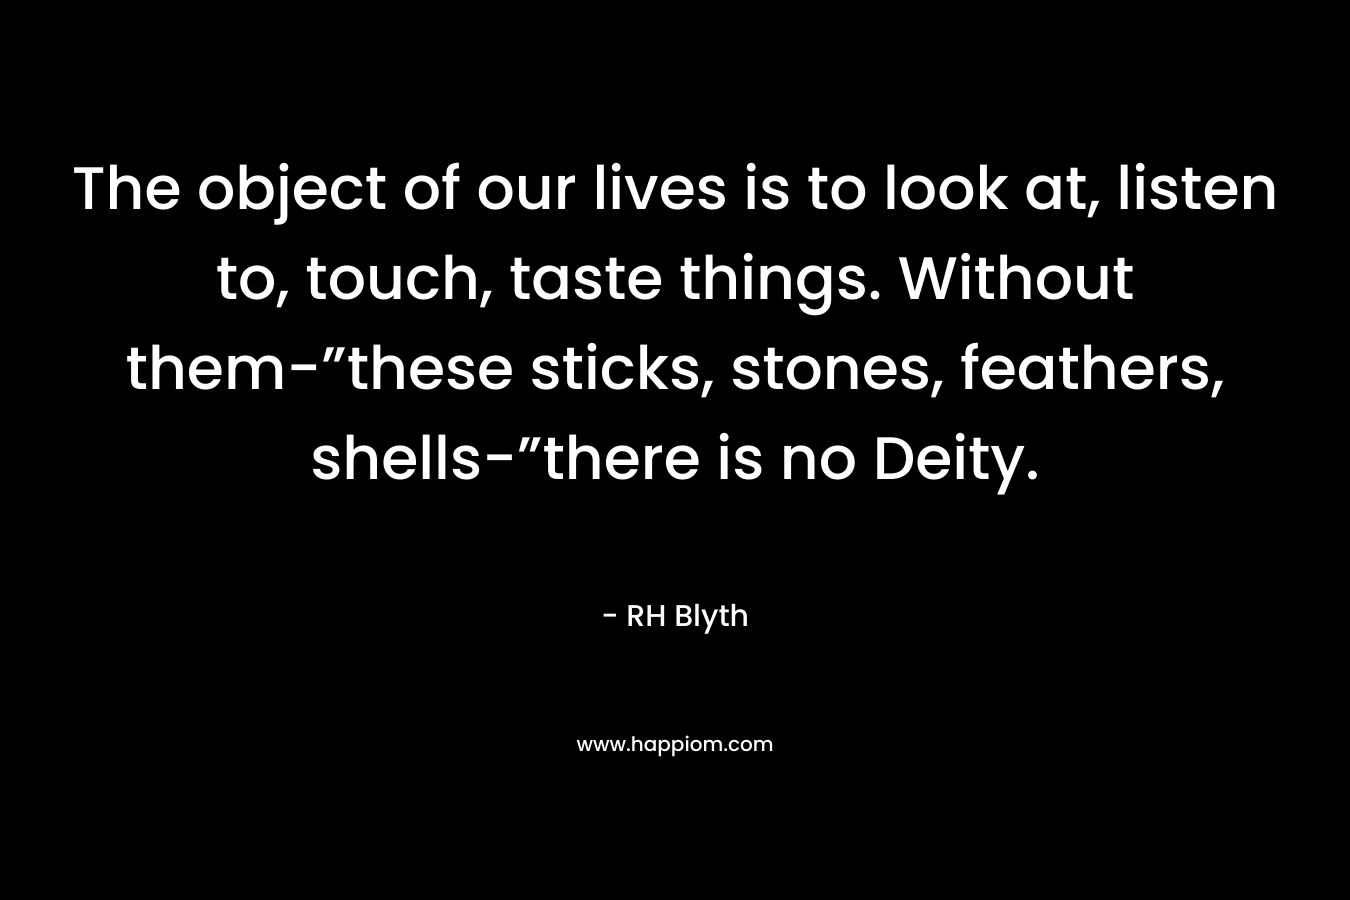 The object of our lives is to look at, listen to, touch, taste things. Without them-”these sticks, stones, feathers, shells-”there is no Deity.